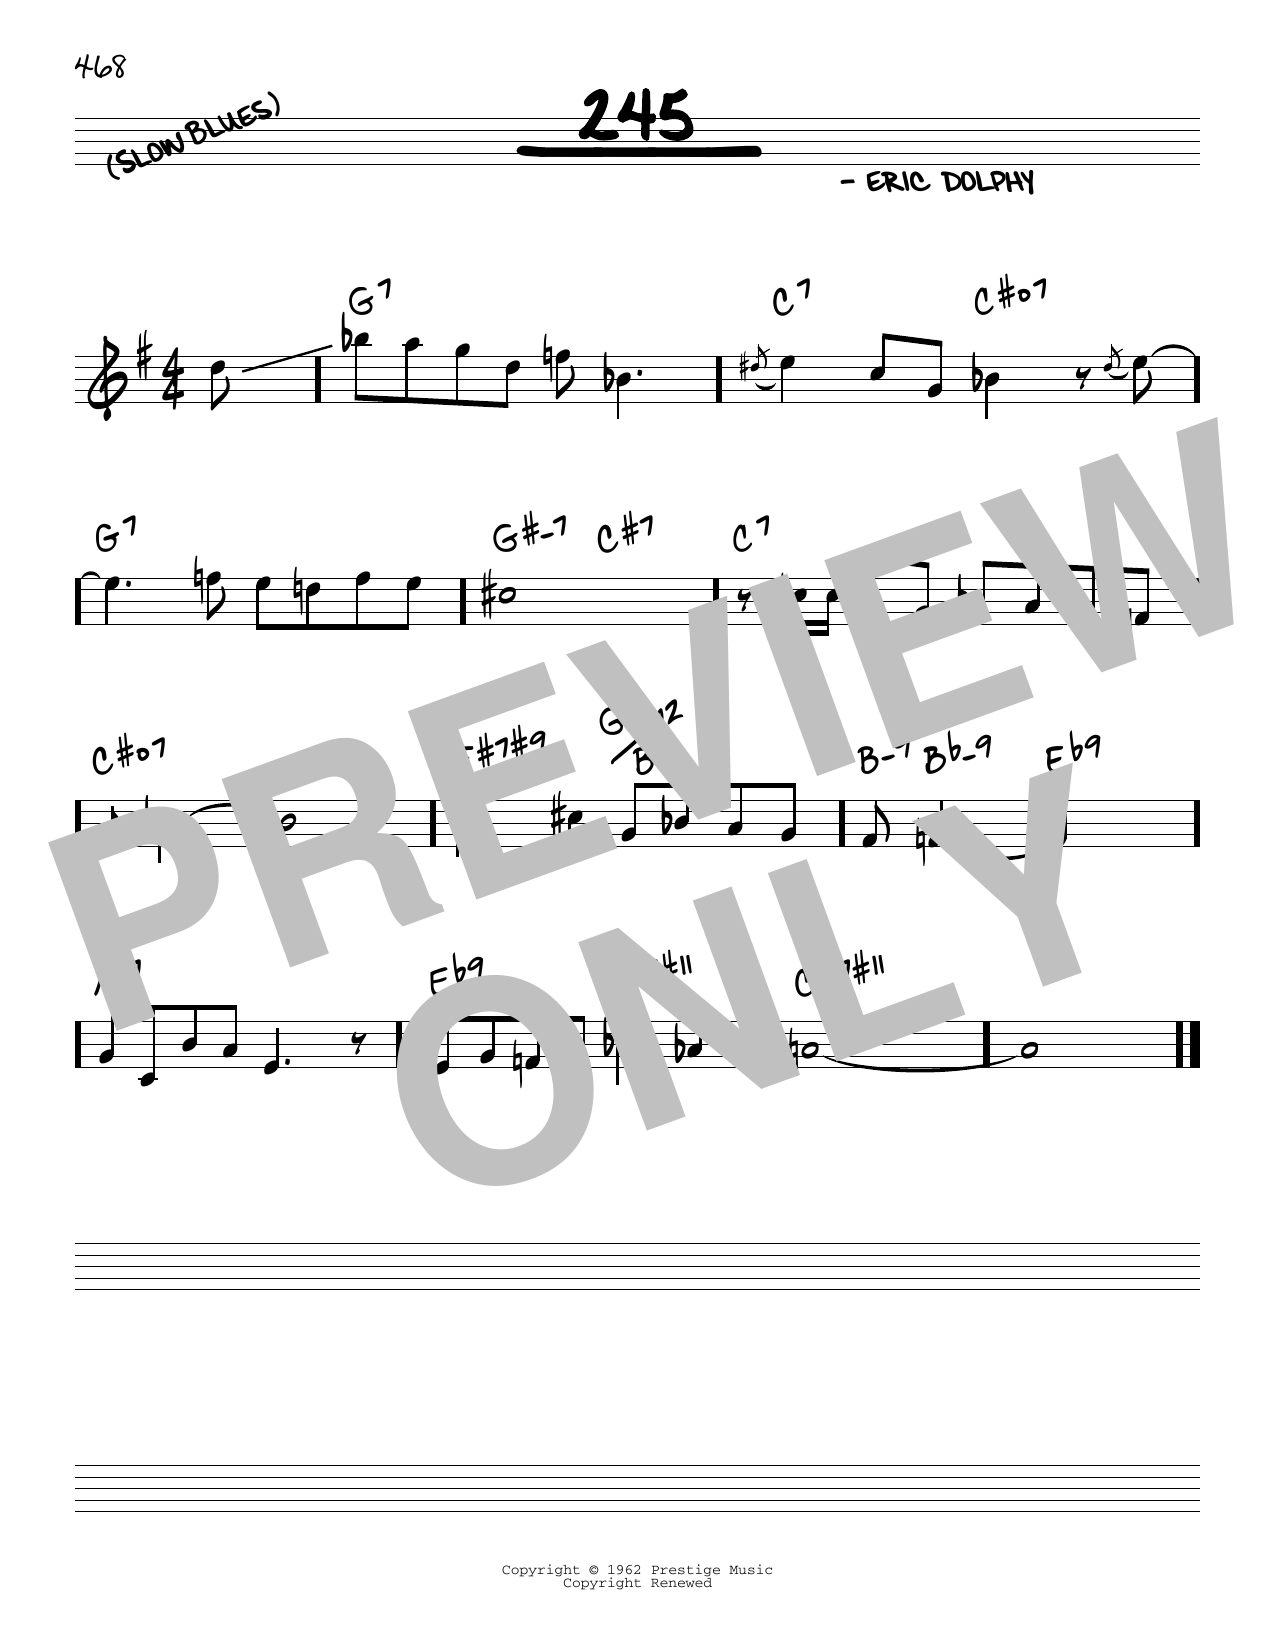 Download Eric Dolphy 245 Sheet Music